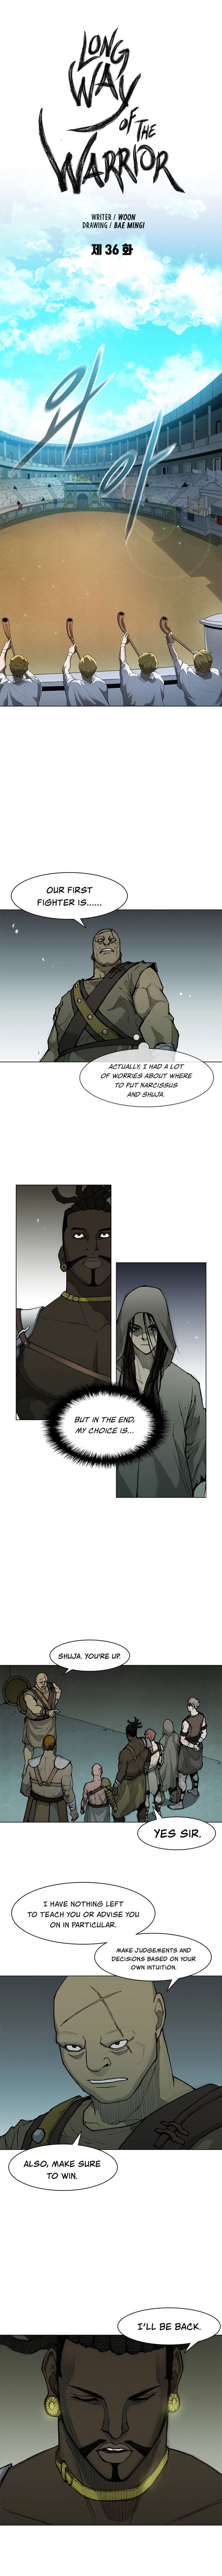 long-way-of-the-warrior-chap-36-6